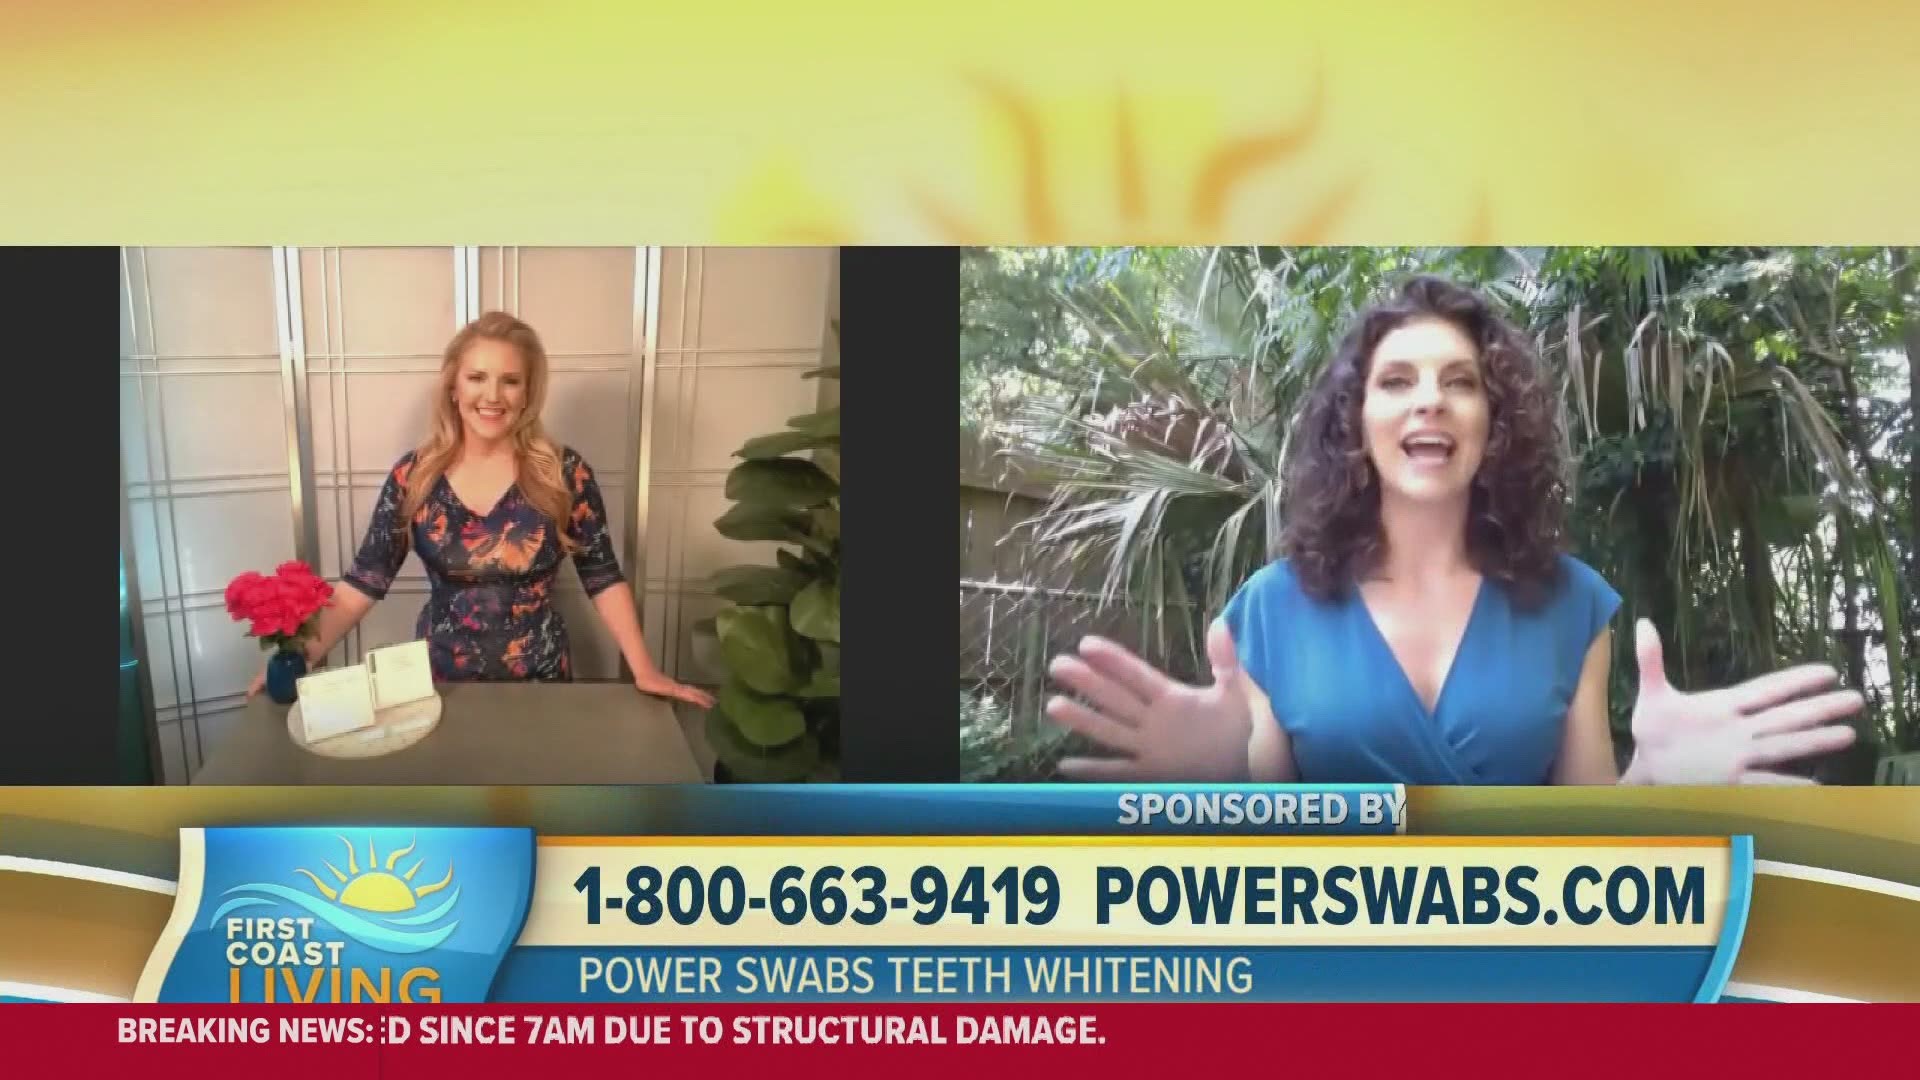 Learn how you can try Power Swabs for 40% off with free shipping!